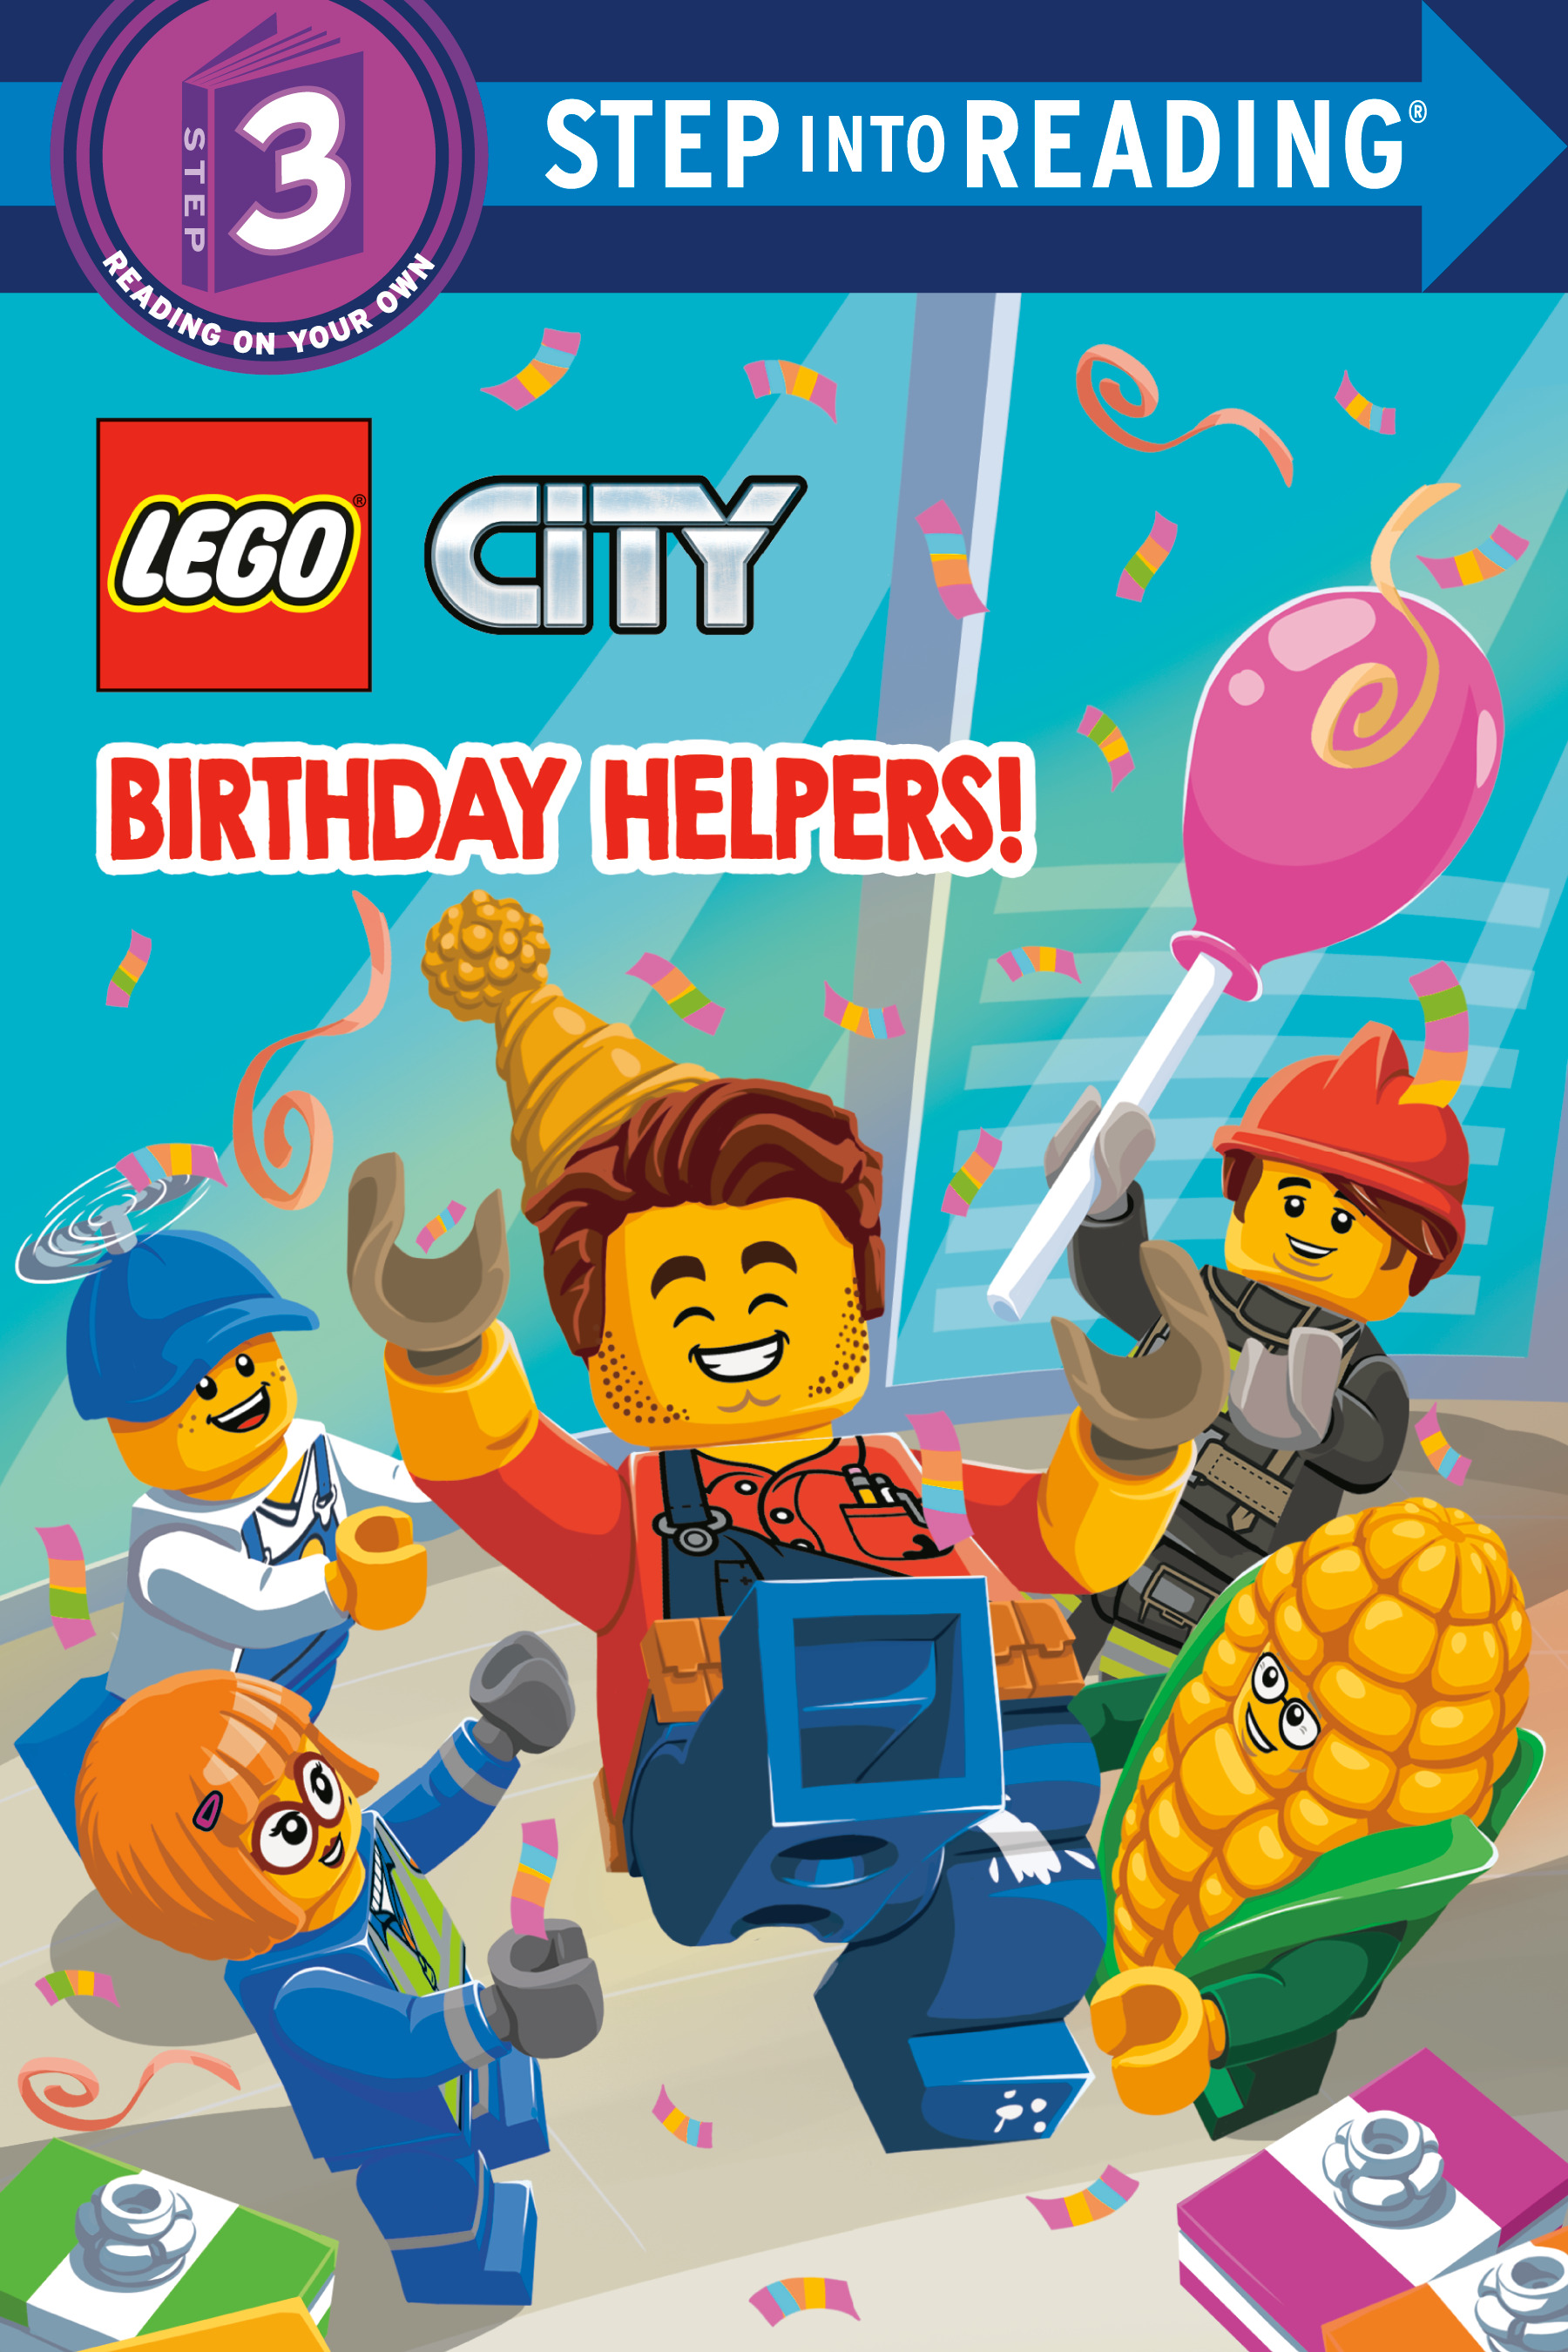 Step Into Reading - Birthday Helpers! (LEGO City) | First reader